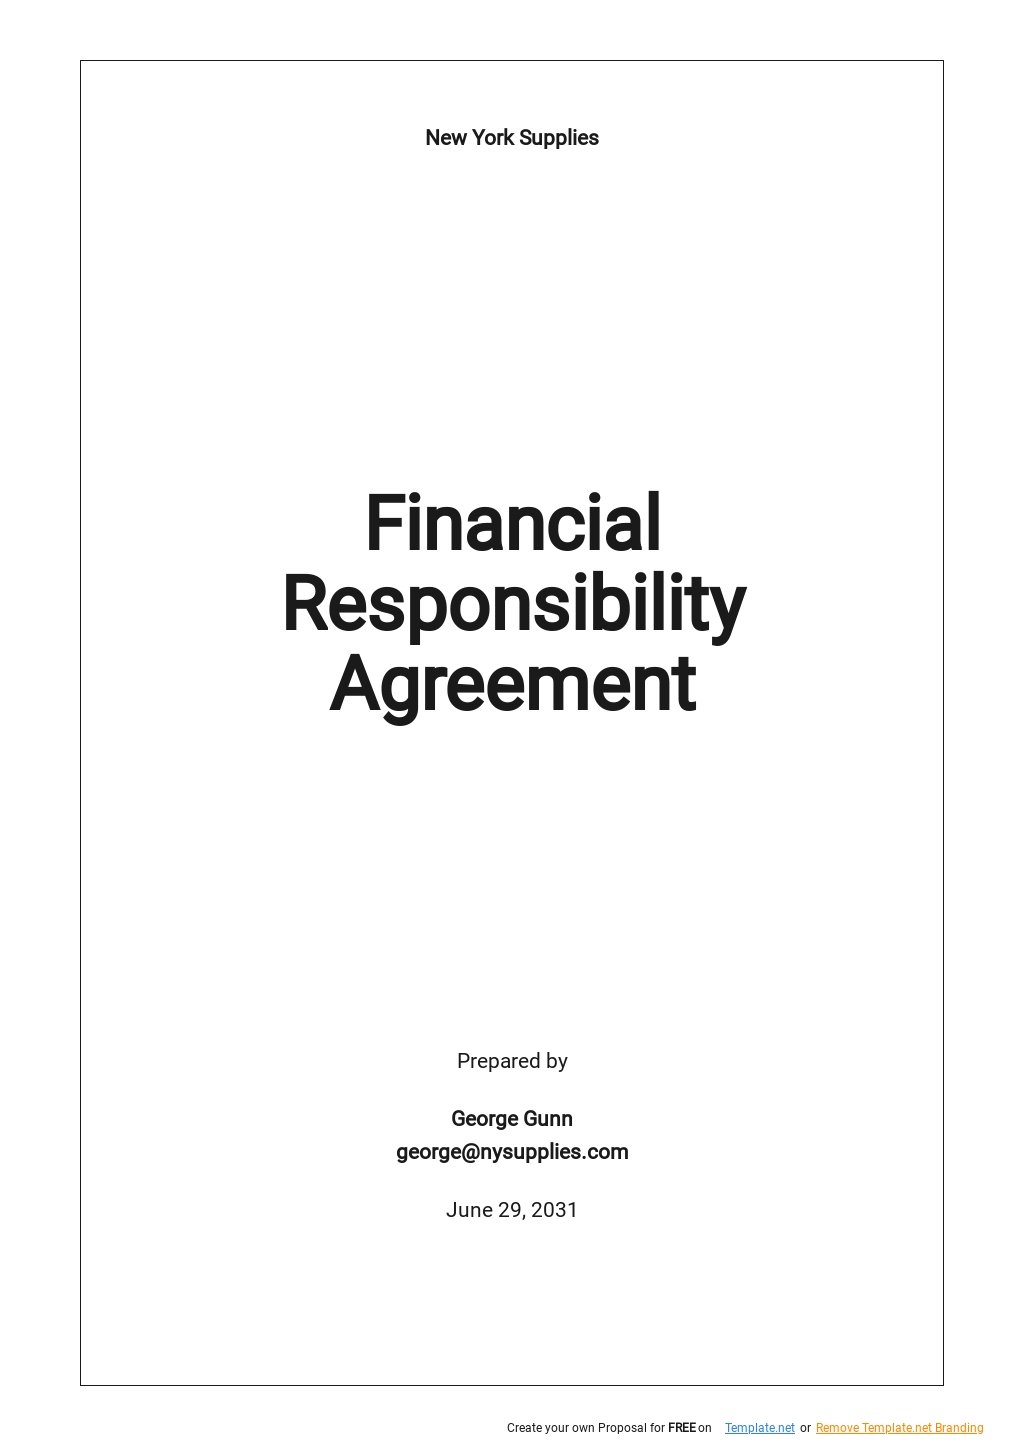 Free Financial Responsibility Agreement Template.jpe